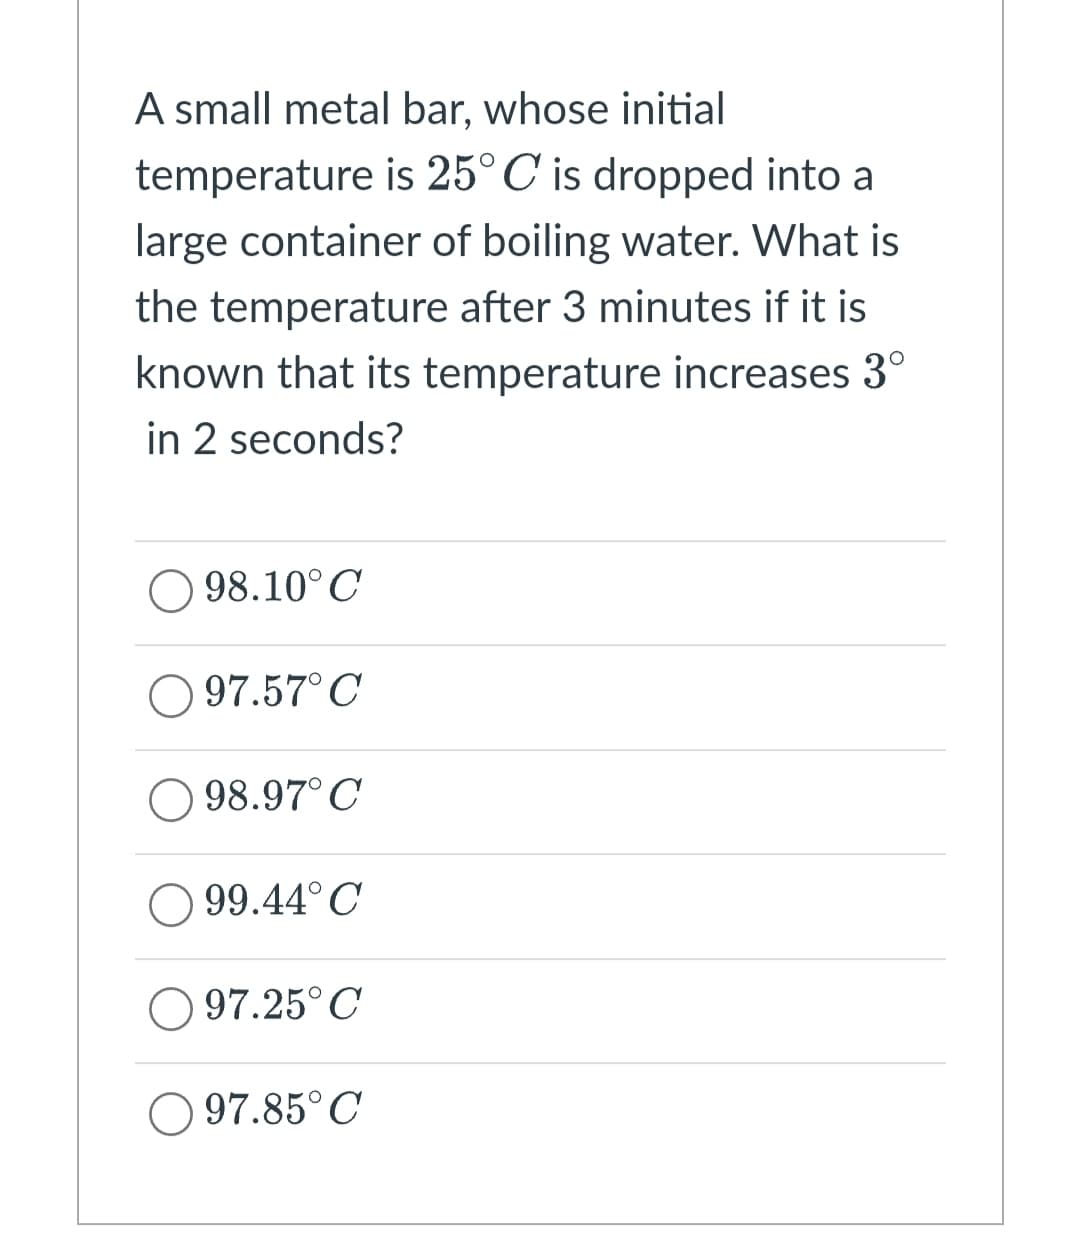 A small metal bar, whose initial
temperature is 25°C is dropped into a
large container of boiling water. What is
the temperature after 3 minutes if it is
known that its temperature increases 3°
in 2 seconds?
98.10°C
97.57°C
98.97°C
99.44° C
97.25°C
O97.85°C